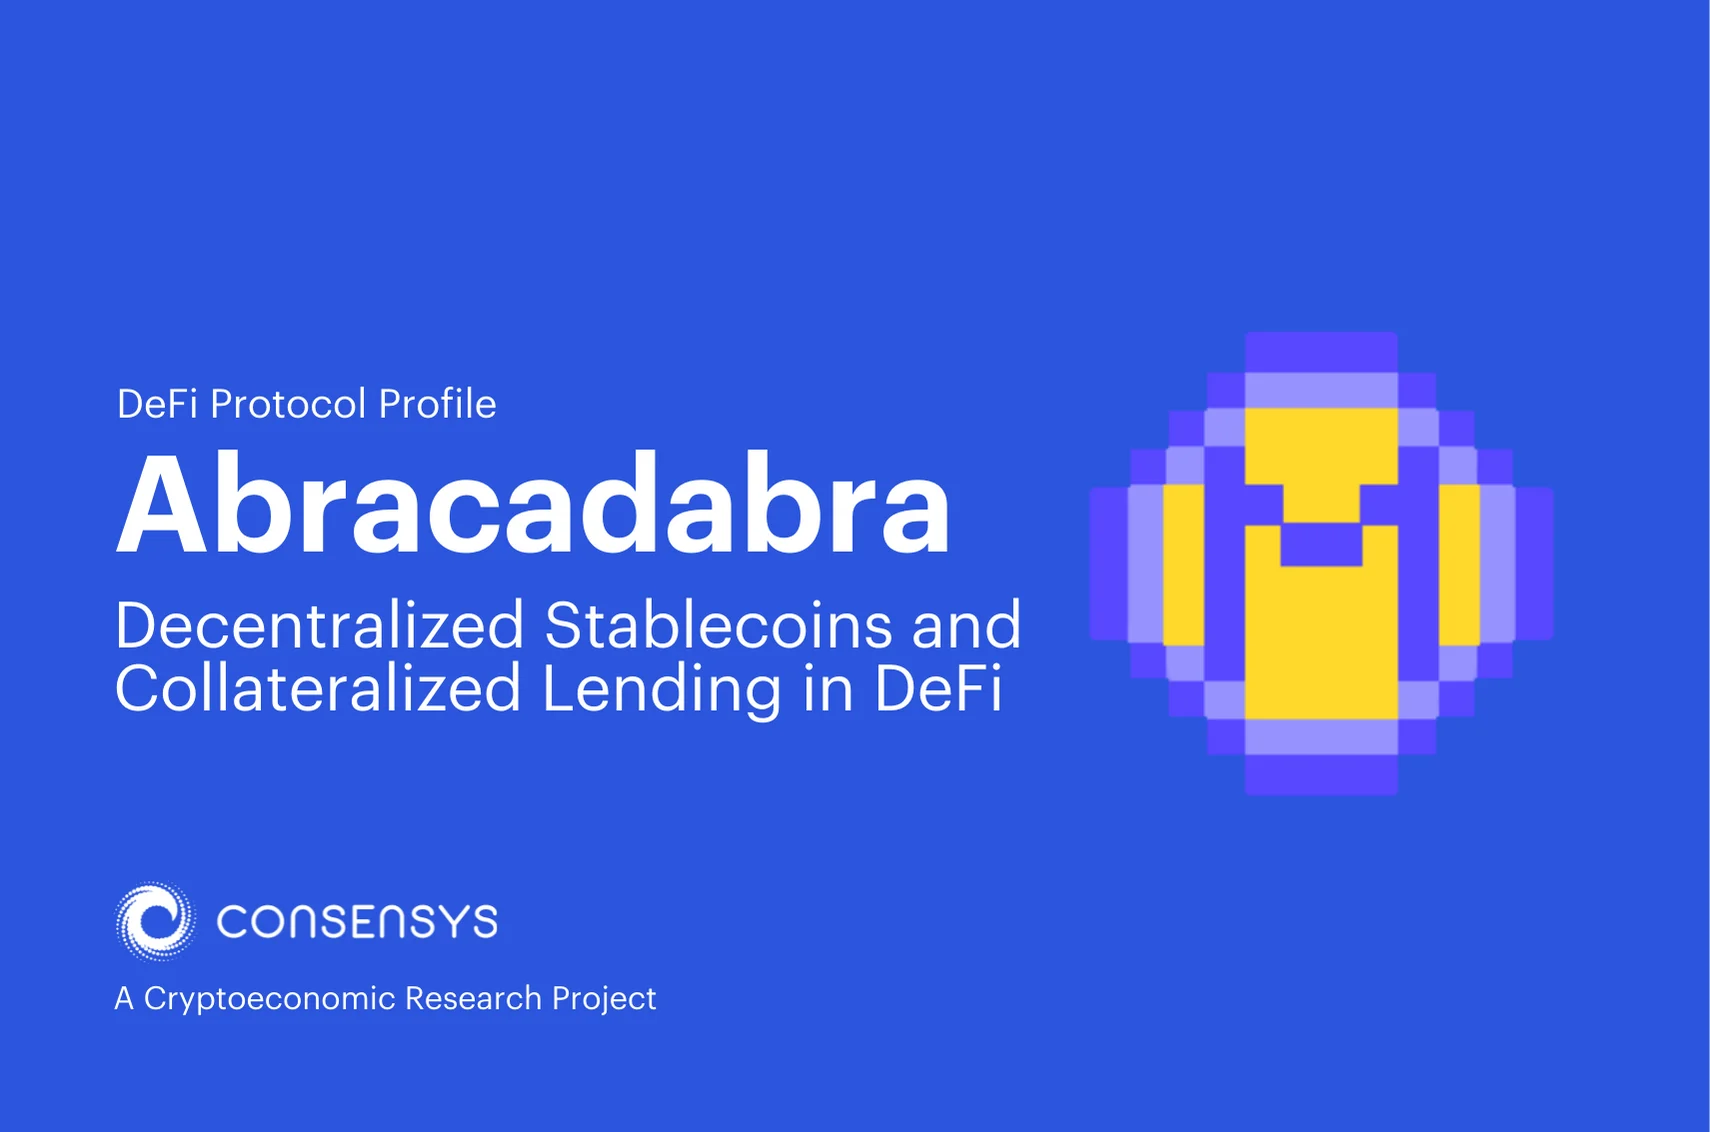 Image: Abracadabra: Decentralized Stablecoins and Collateralized Lending in DeFi